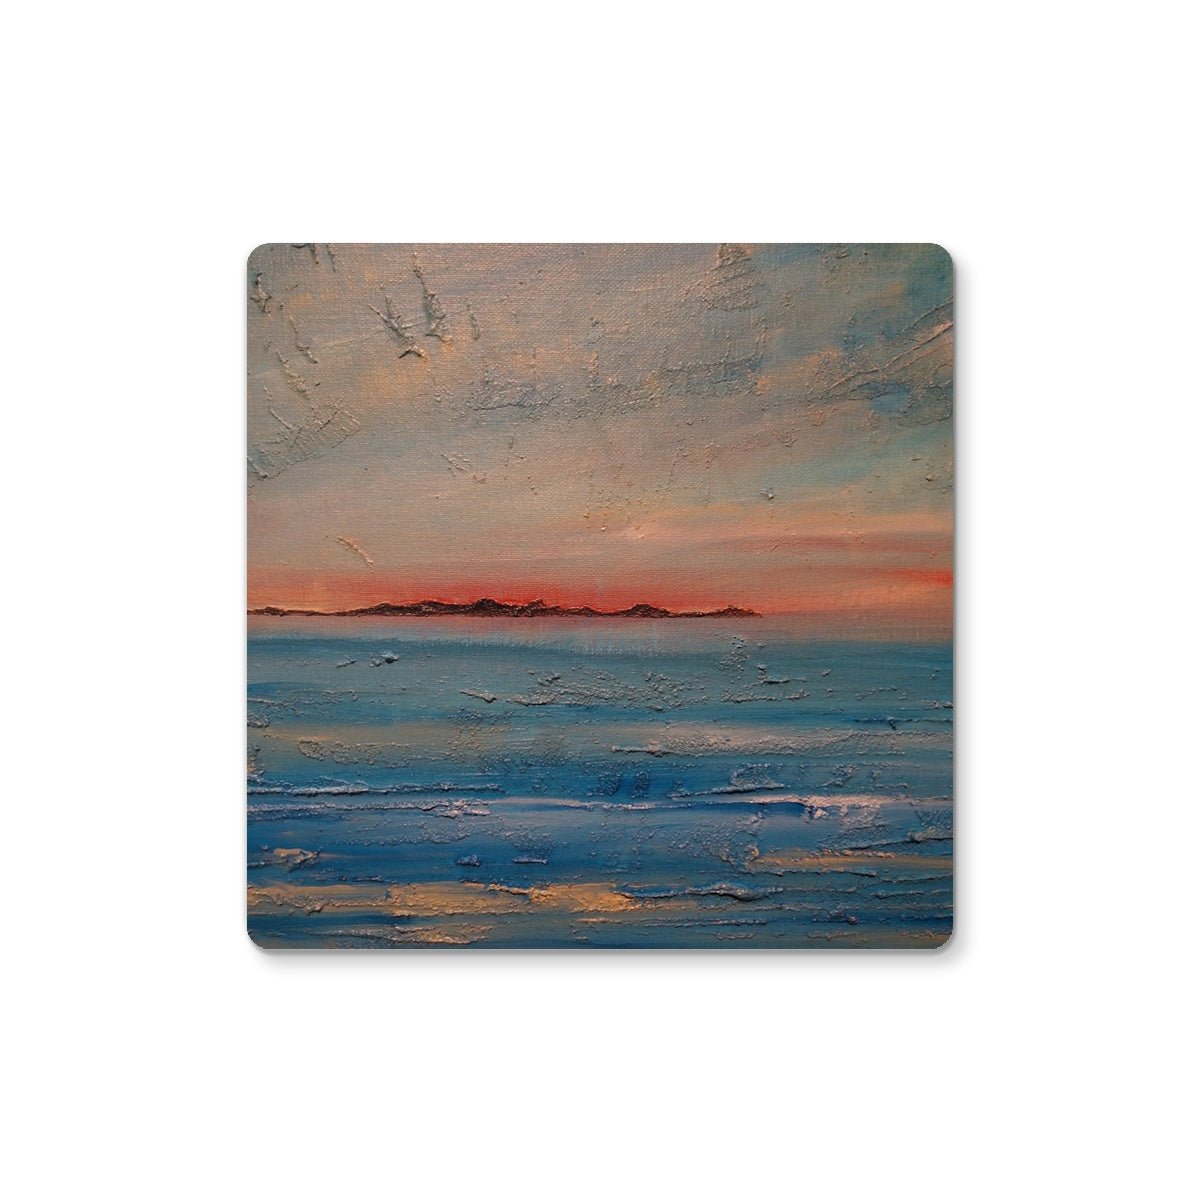 Gigha Sunset Art Gifts Coaster-Coasters-Hebridean Islands Art Gallery-Single Coaster-Paintings, Prints, Homeware, Art Gifts From Scotland By Scottish Artist Kevin Hunter